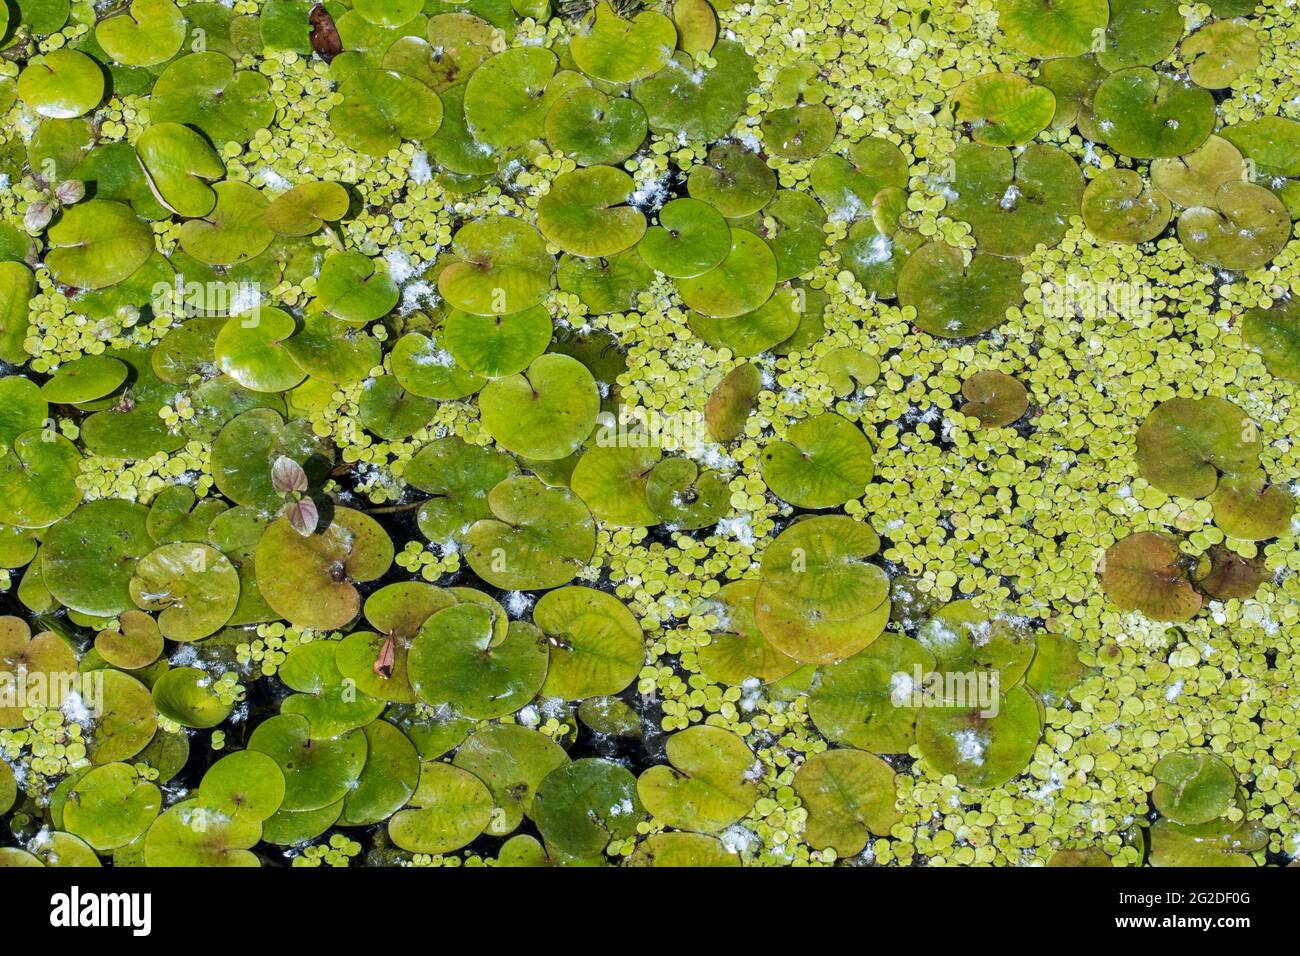 Duckweed and frogbit / European frog's-bit (Hydrocharis morsus-ranae) floating leaves in pond, native to Europe Stock Photo